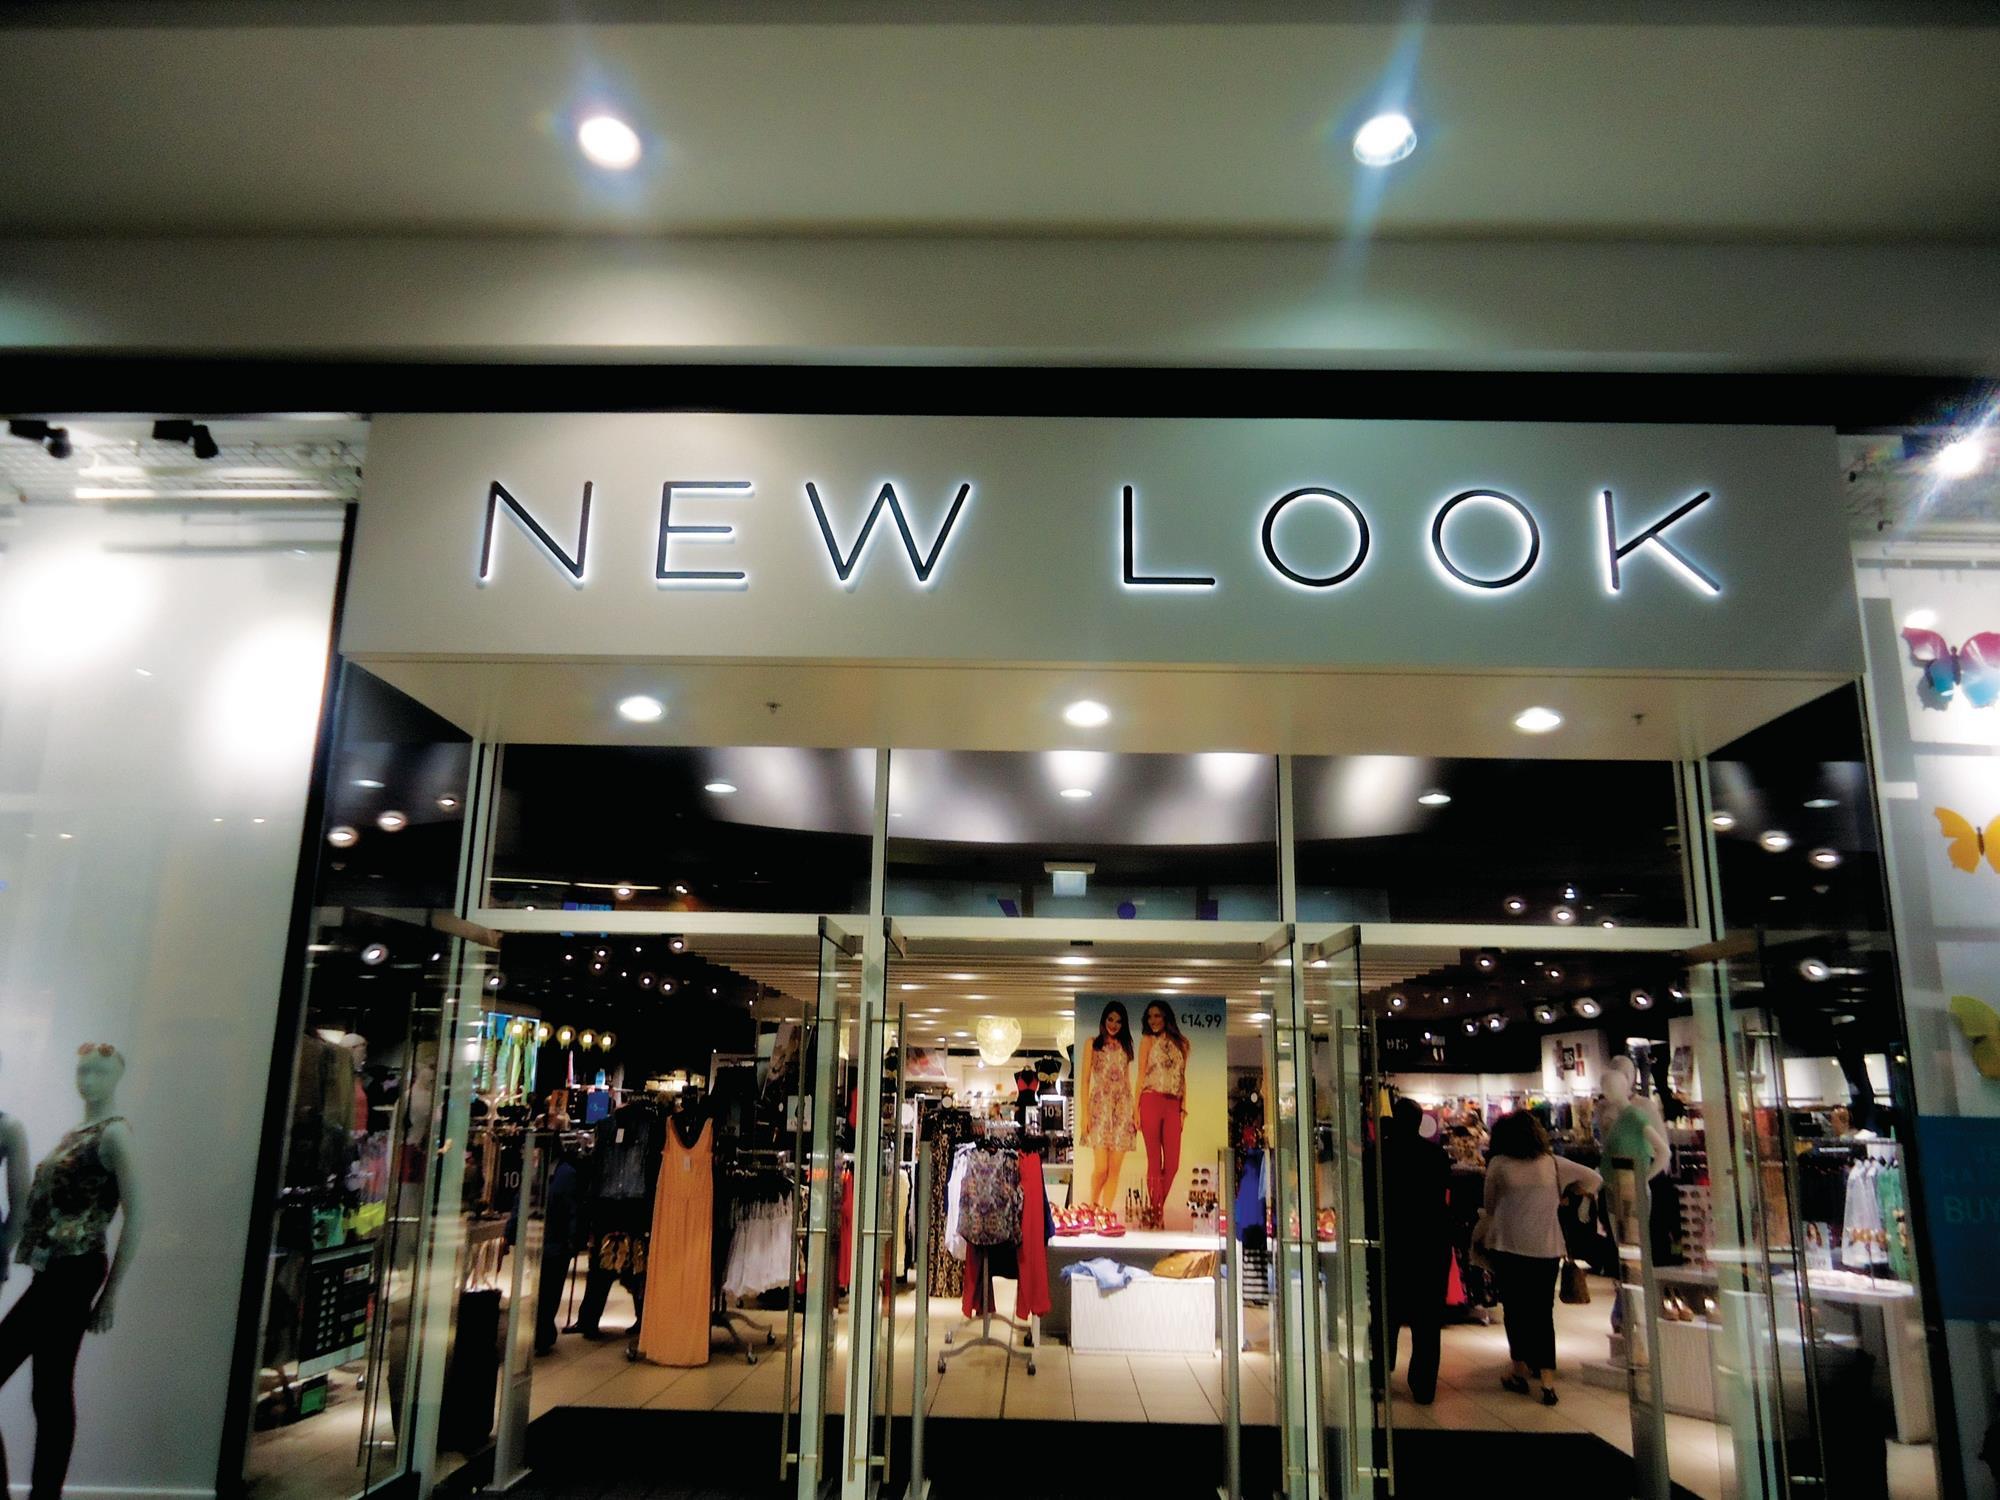 In pictures: New Look reviews results from refurbished stores | Photo ...